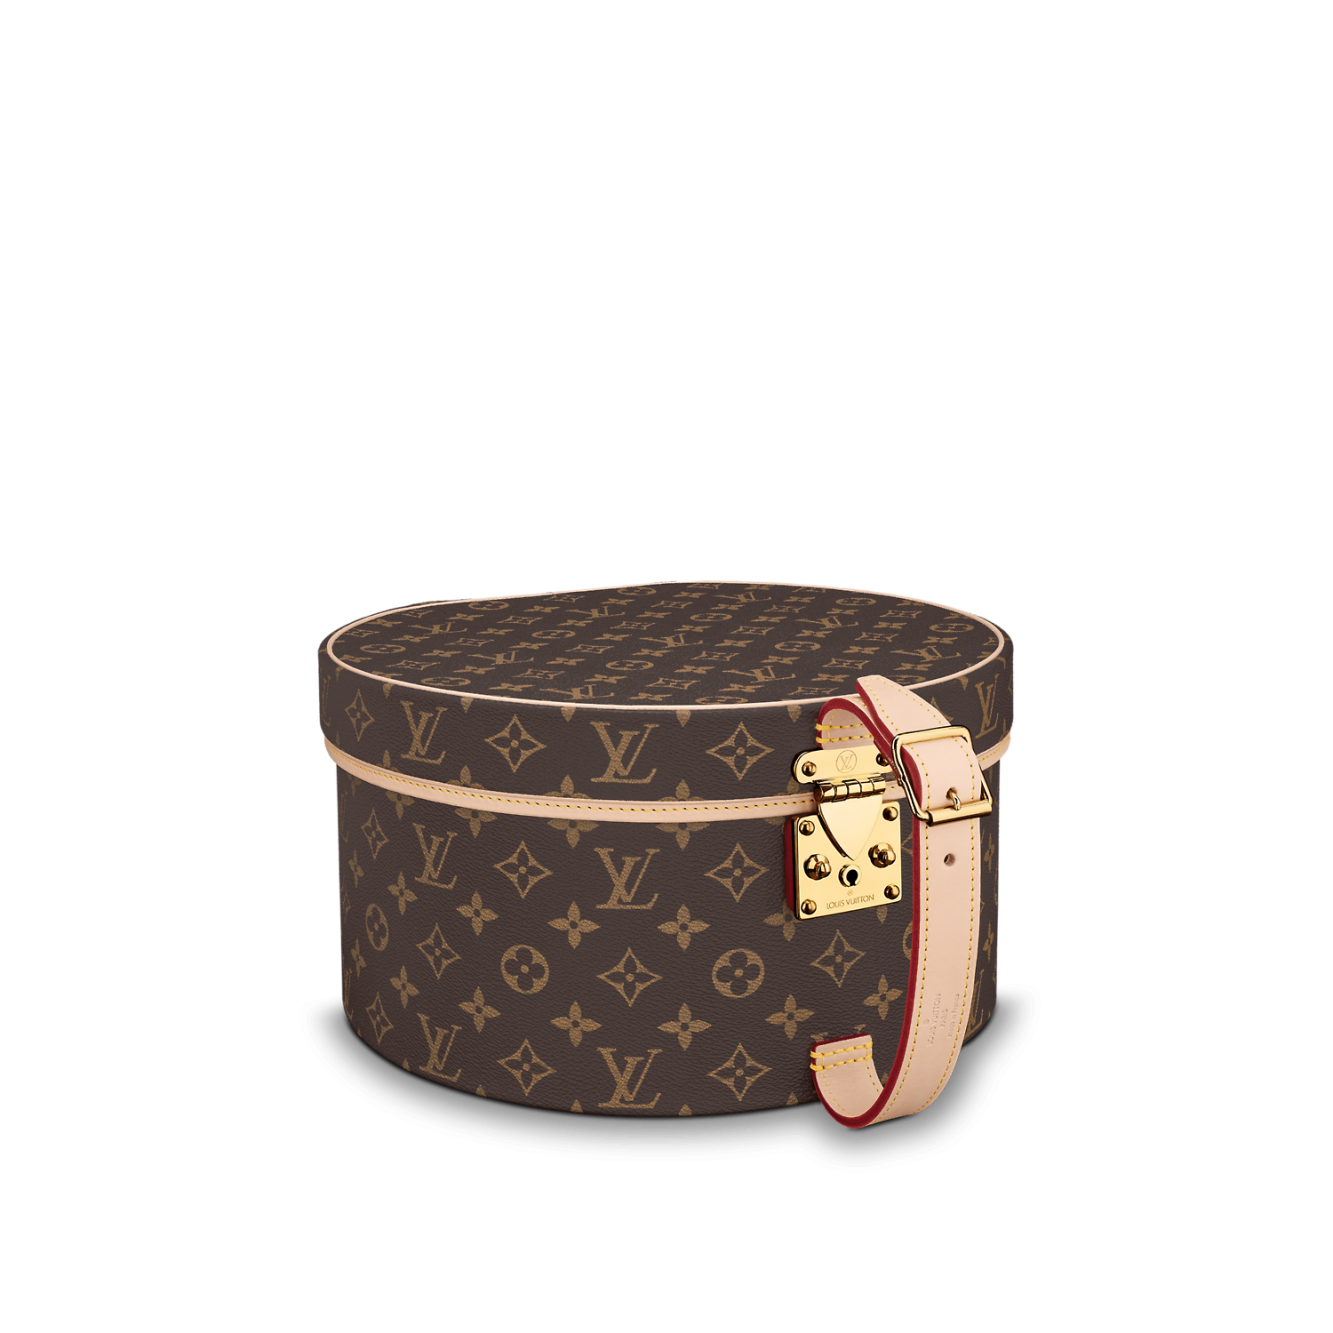 Hat Trunk from Louis Vuitton